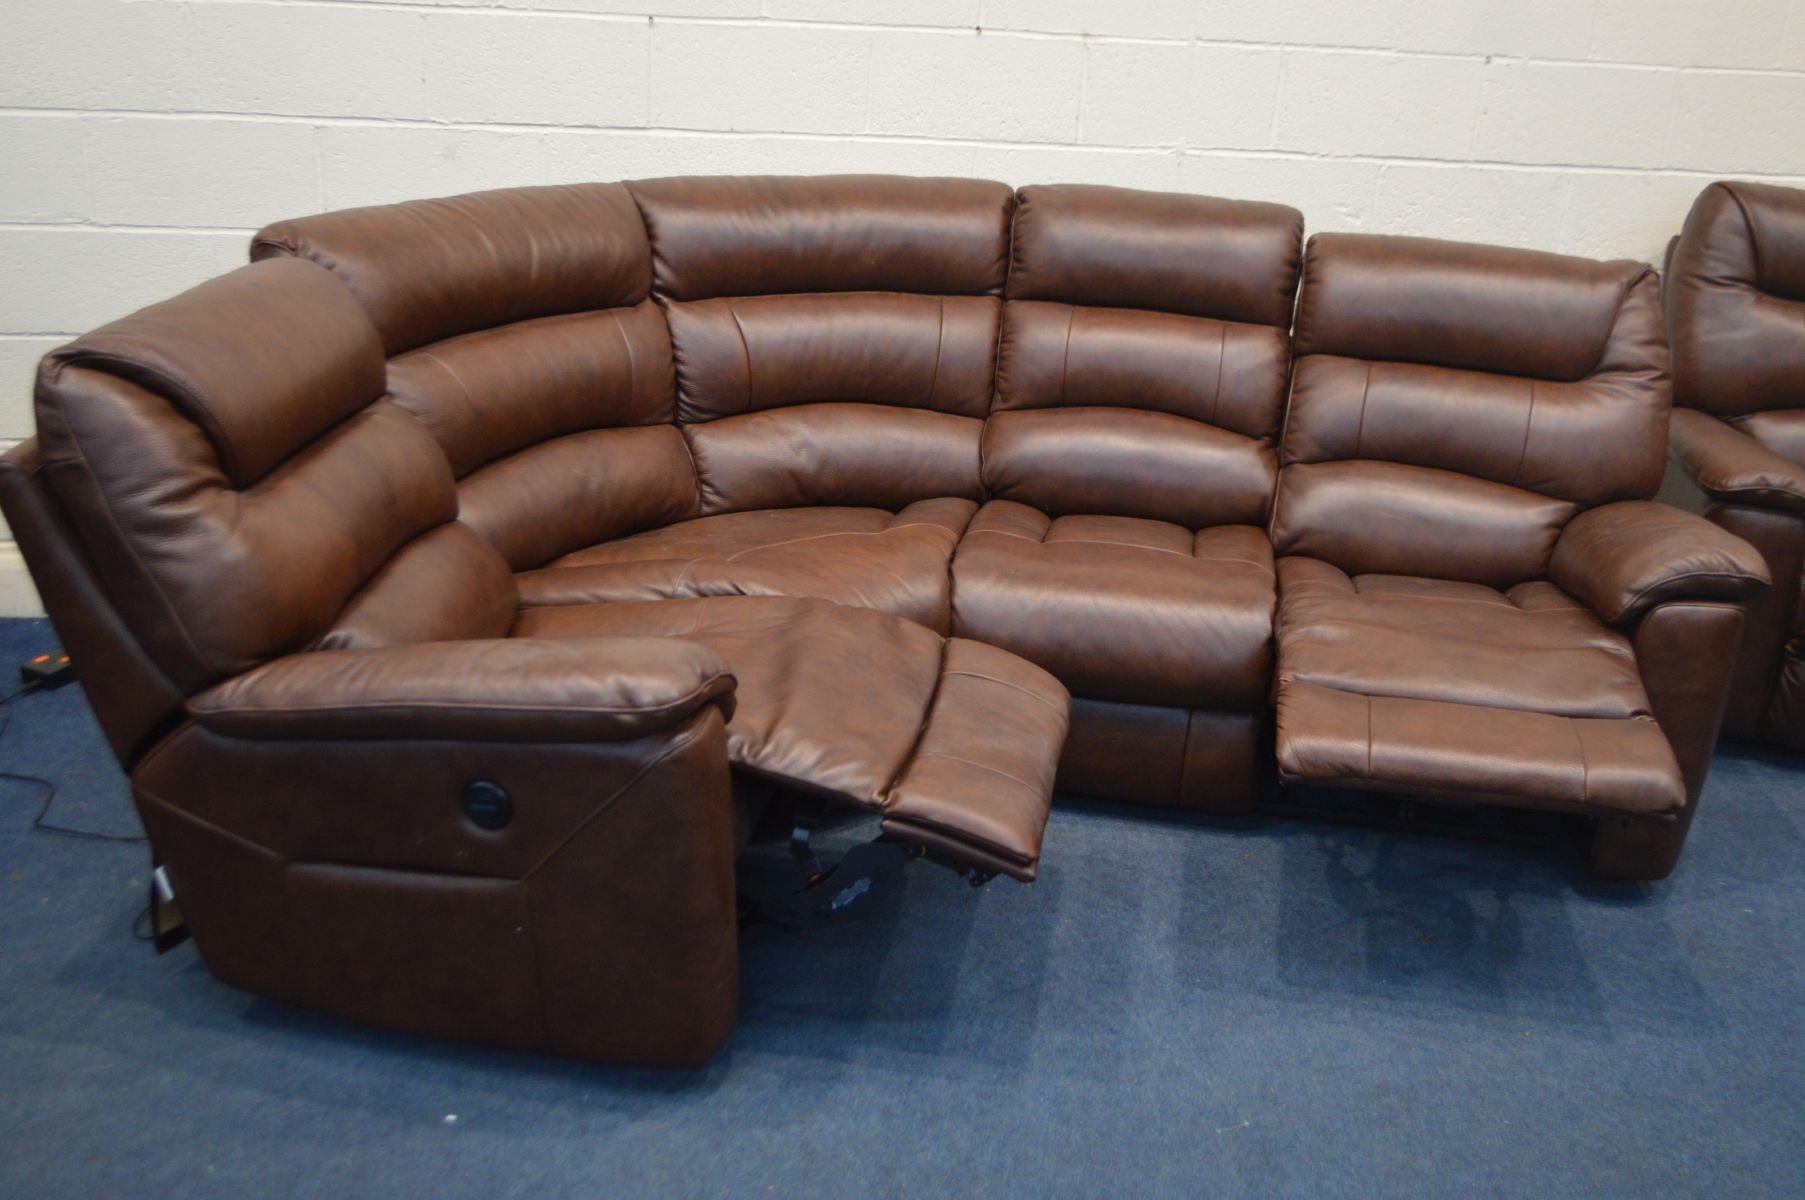 A LA-Z- BOY BROWN LEATHER CORNER SOFA, with electric recliners to each ends, length 250cm x depth - Image 2 of 6